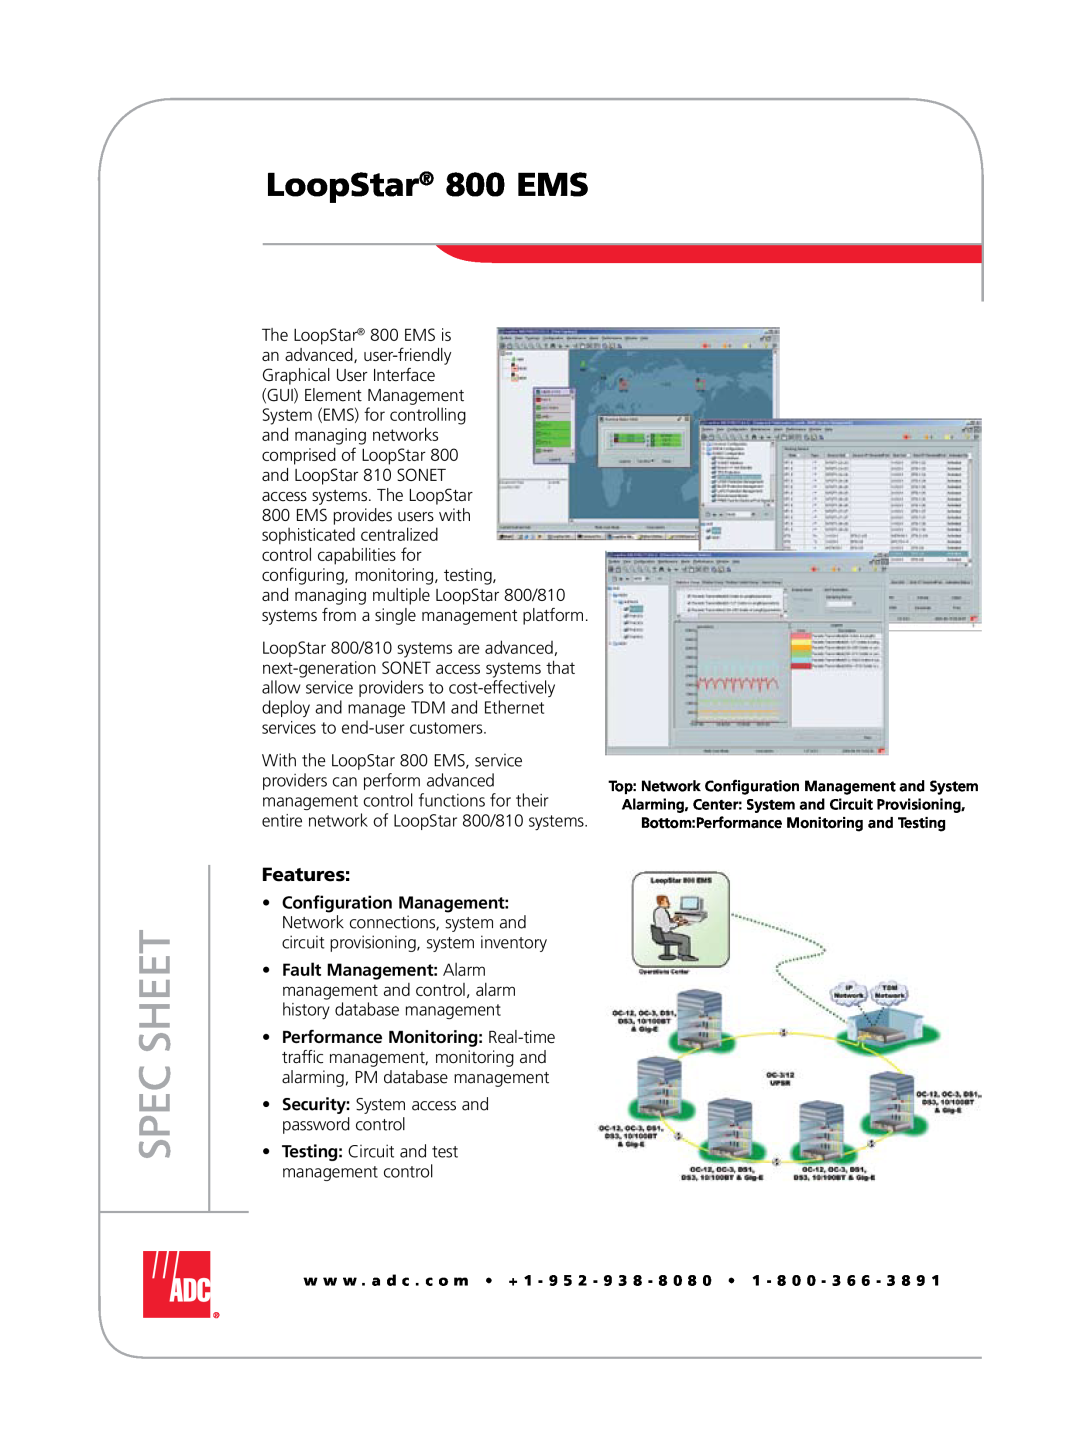 ADC manual Spec Sheet, LoopStar 800 EMS, Features, Testing Circuit and test management control 